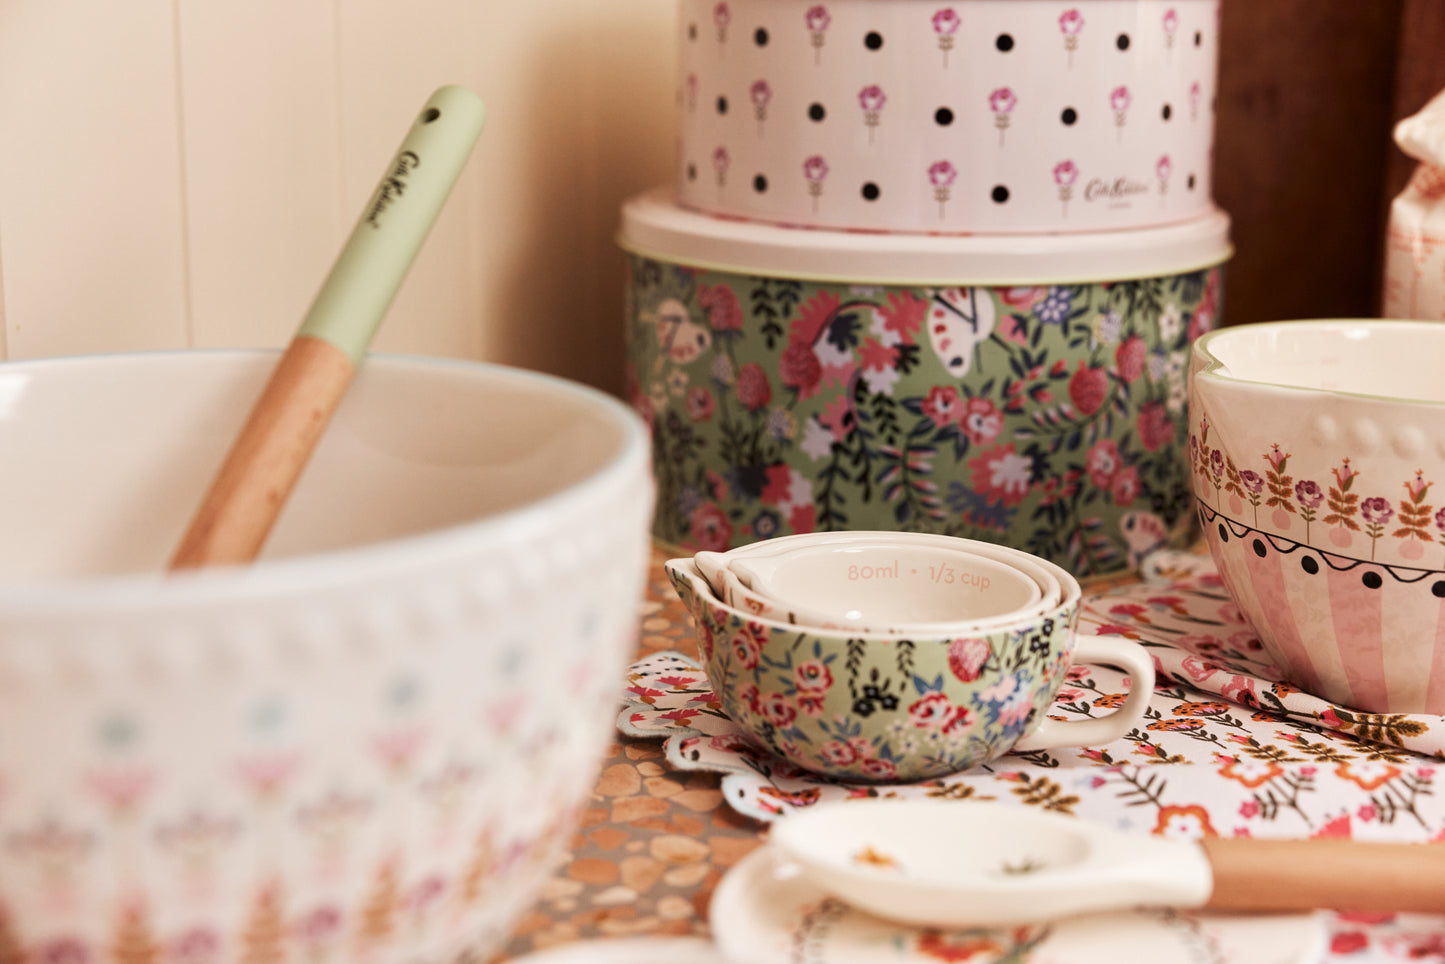 Cath Kidston Painted Table Ceramic Mixing Bowl